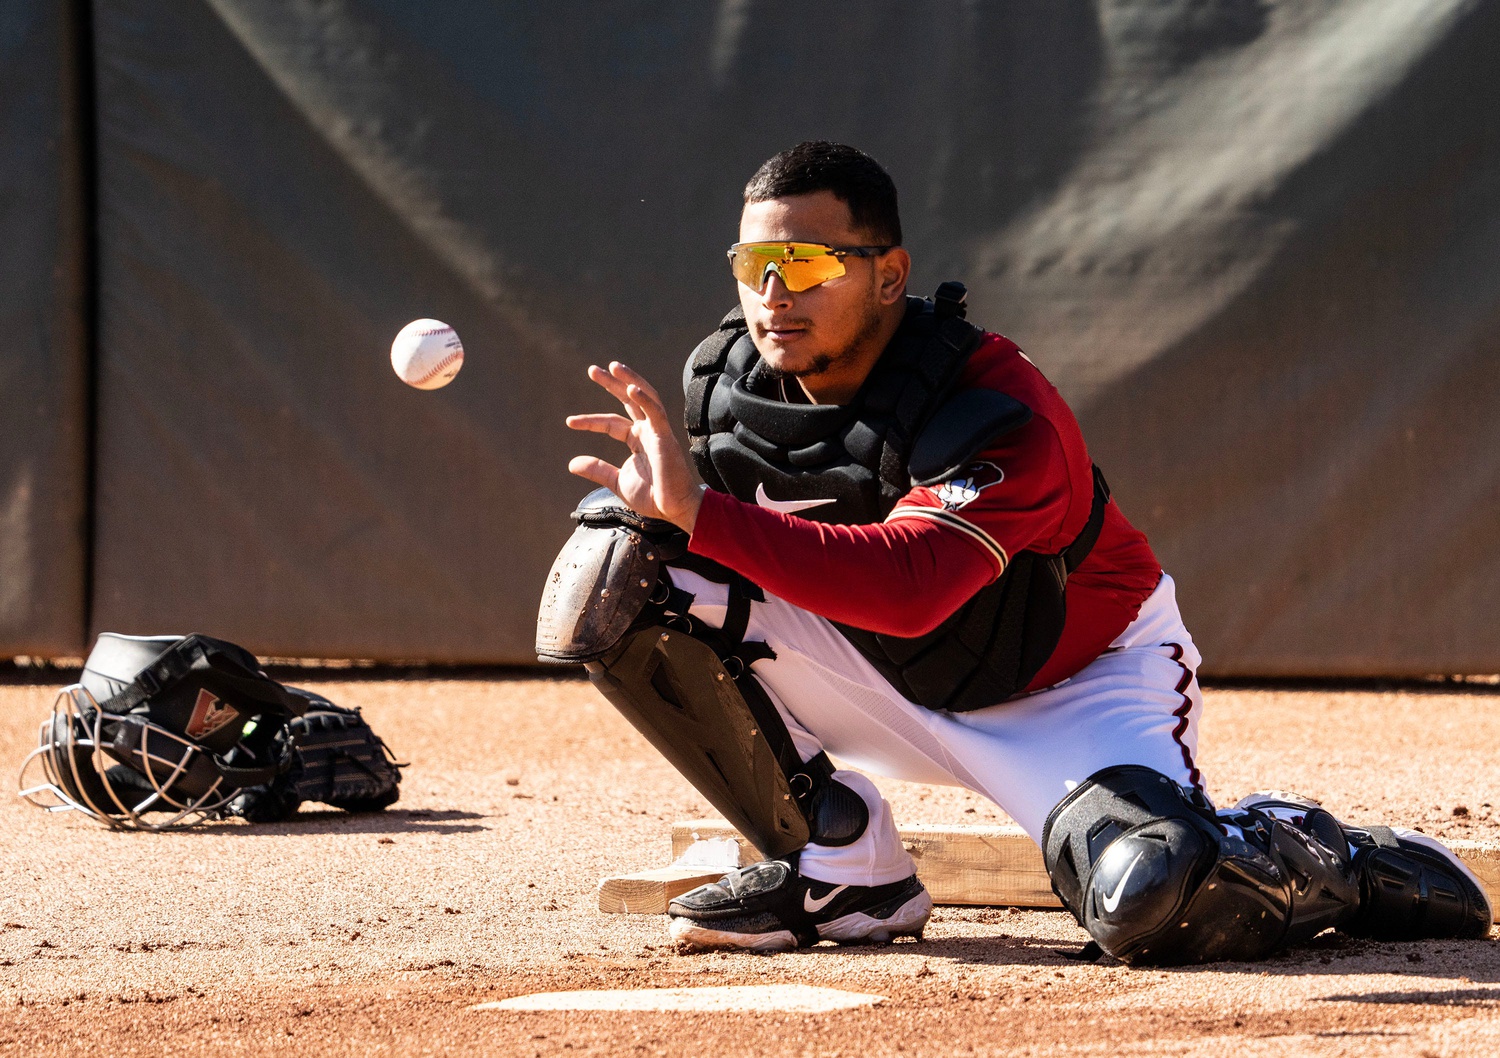 Gabriel Moreno continues to show his power with the D-Backs